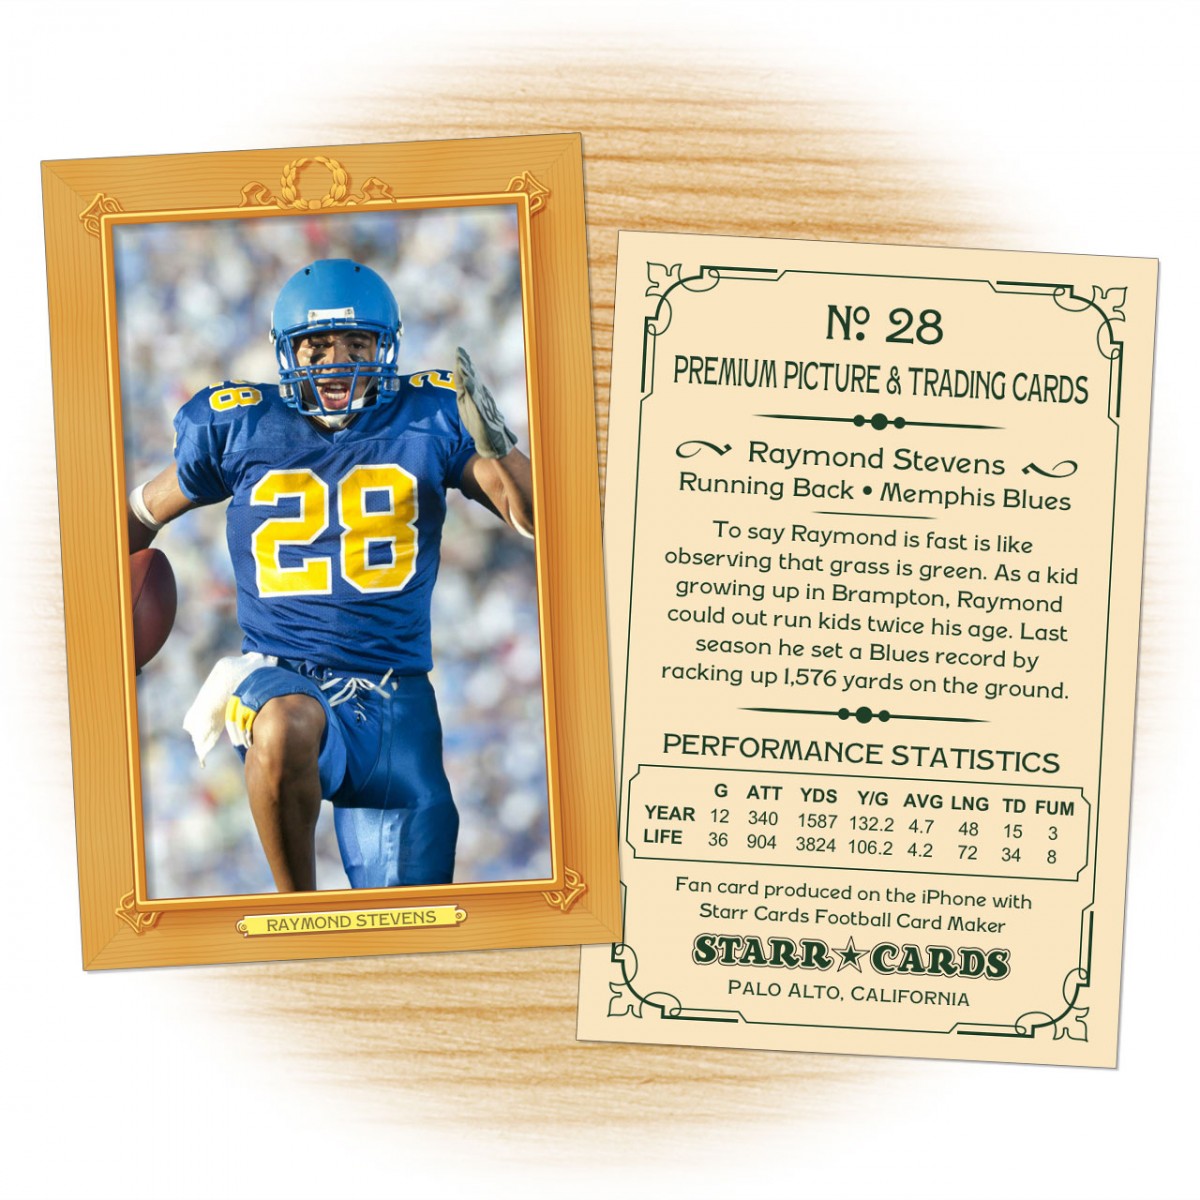 Make Your Own Football Card with Starr Cards